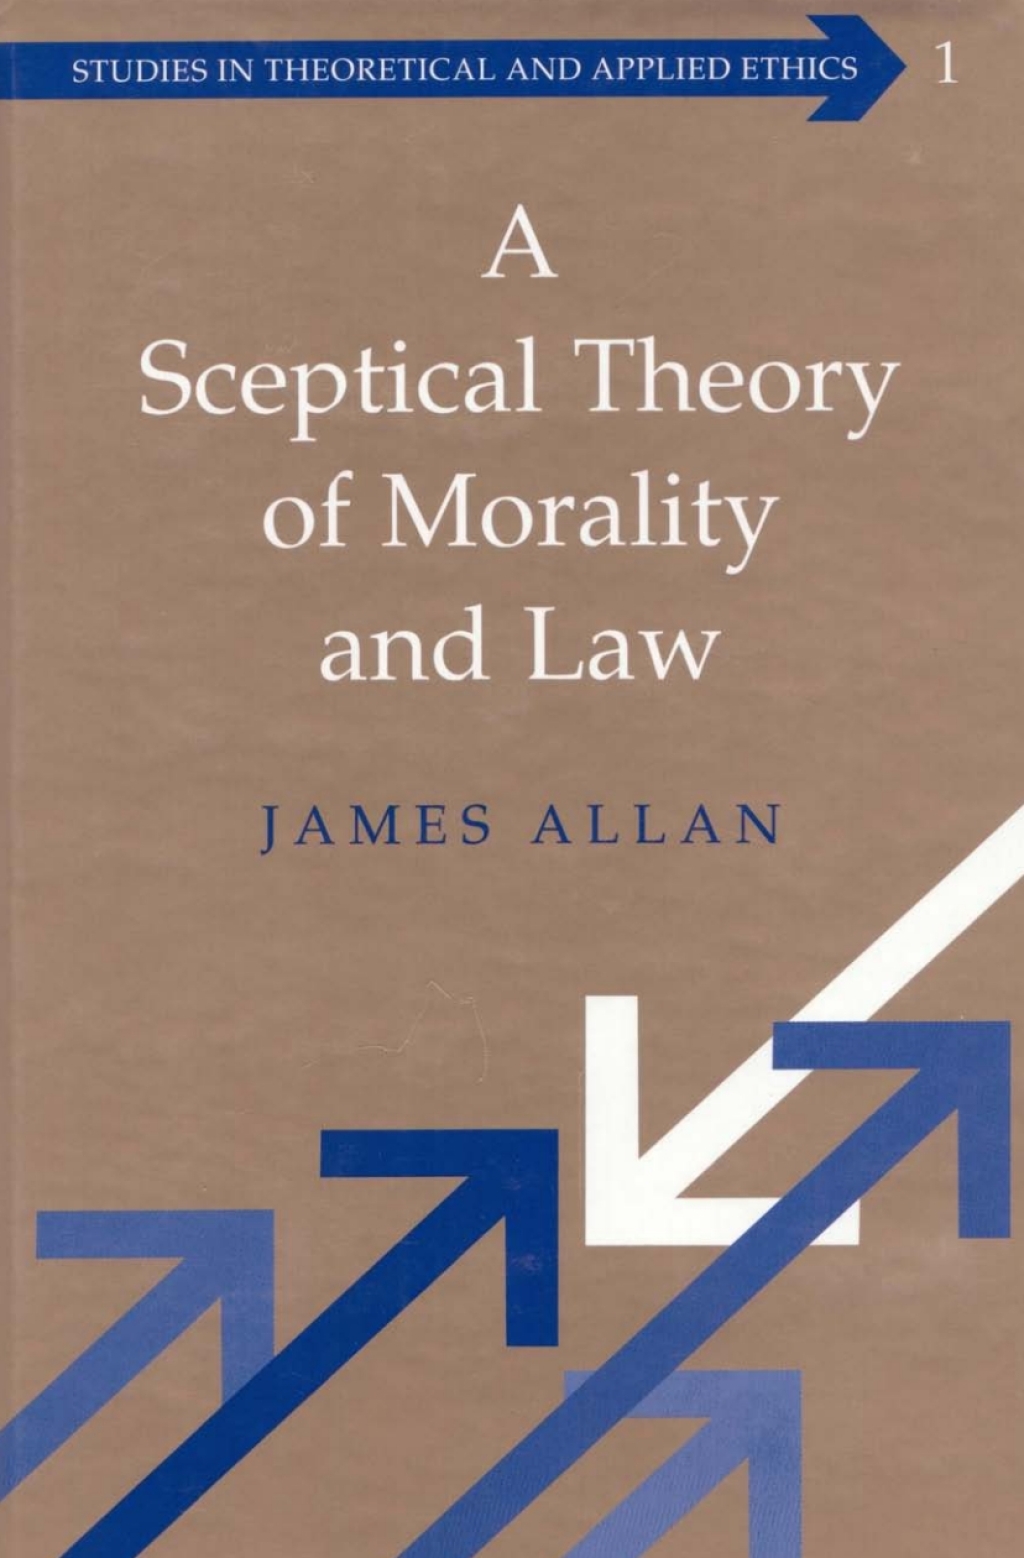 A Sceptical Theory of Morality and Law (eBook) - James Allan